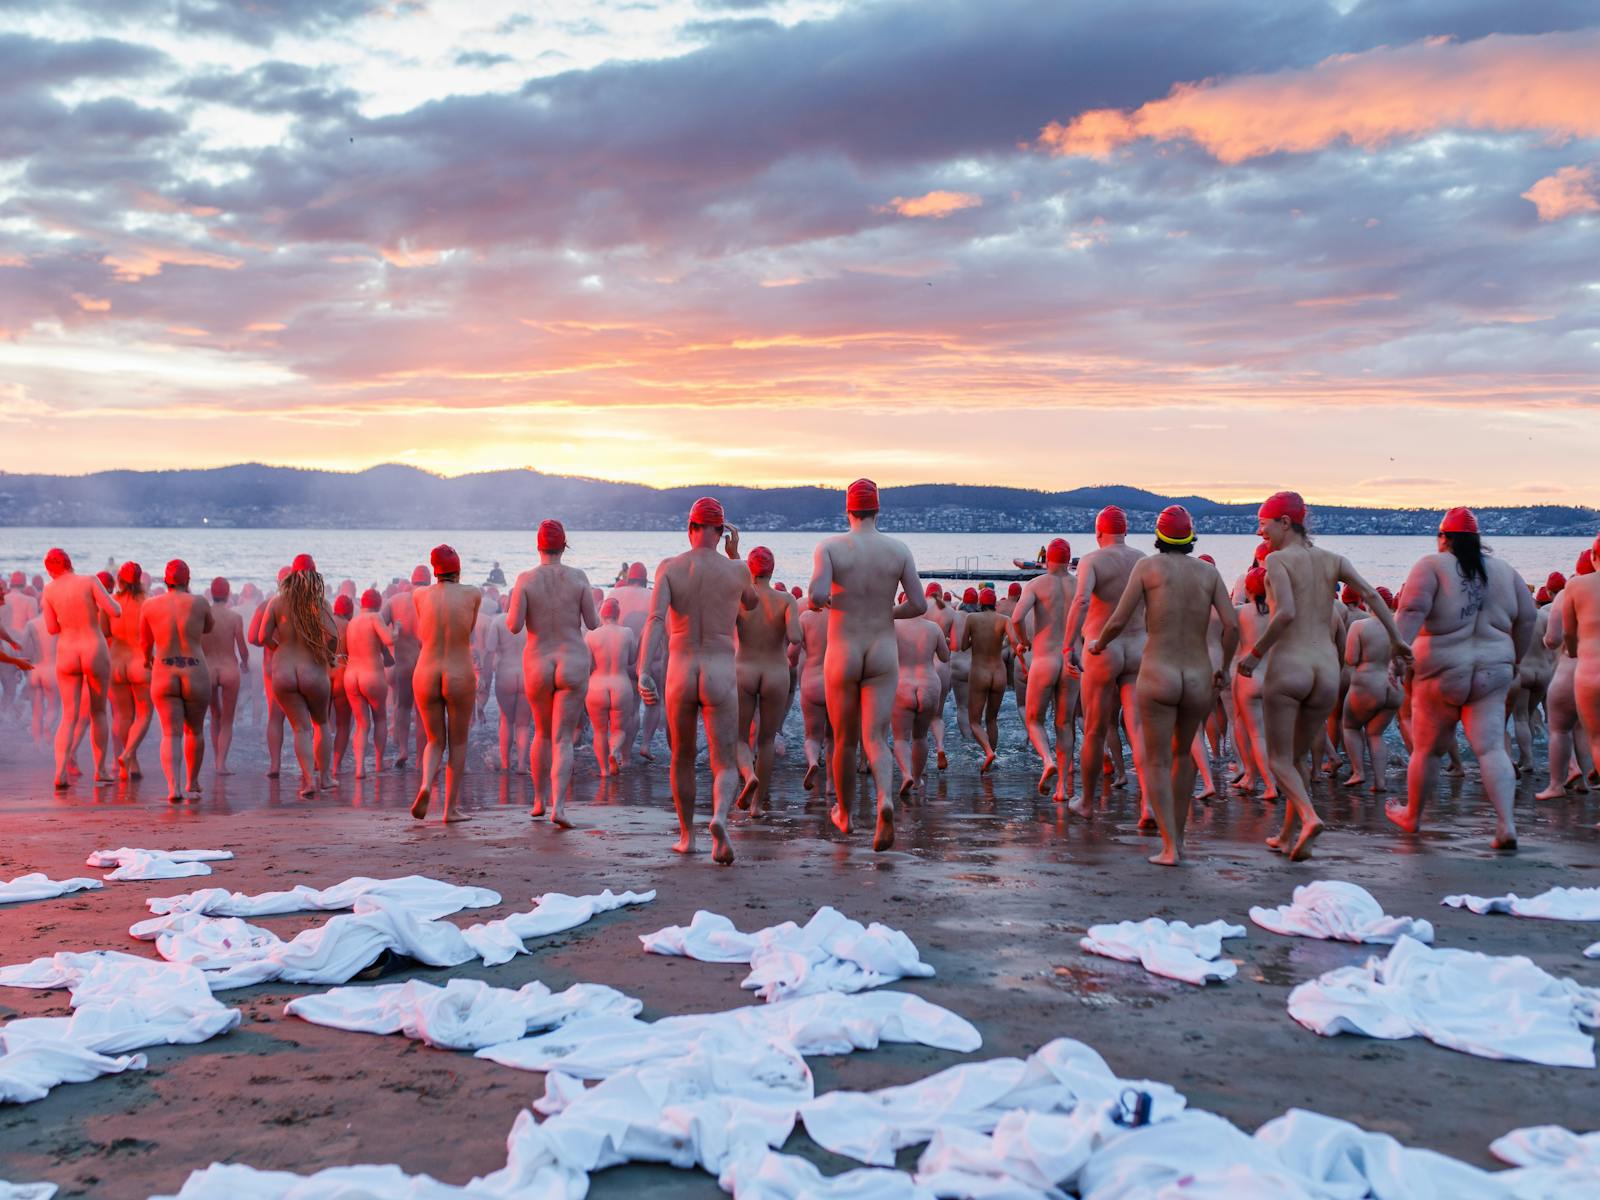 Thousands of people run into the River Derwent at sunrise for Dark Mofo's annual Nude Solstice Swim